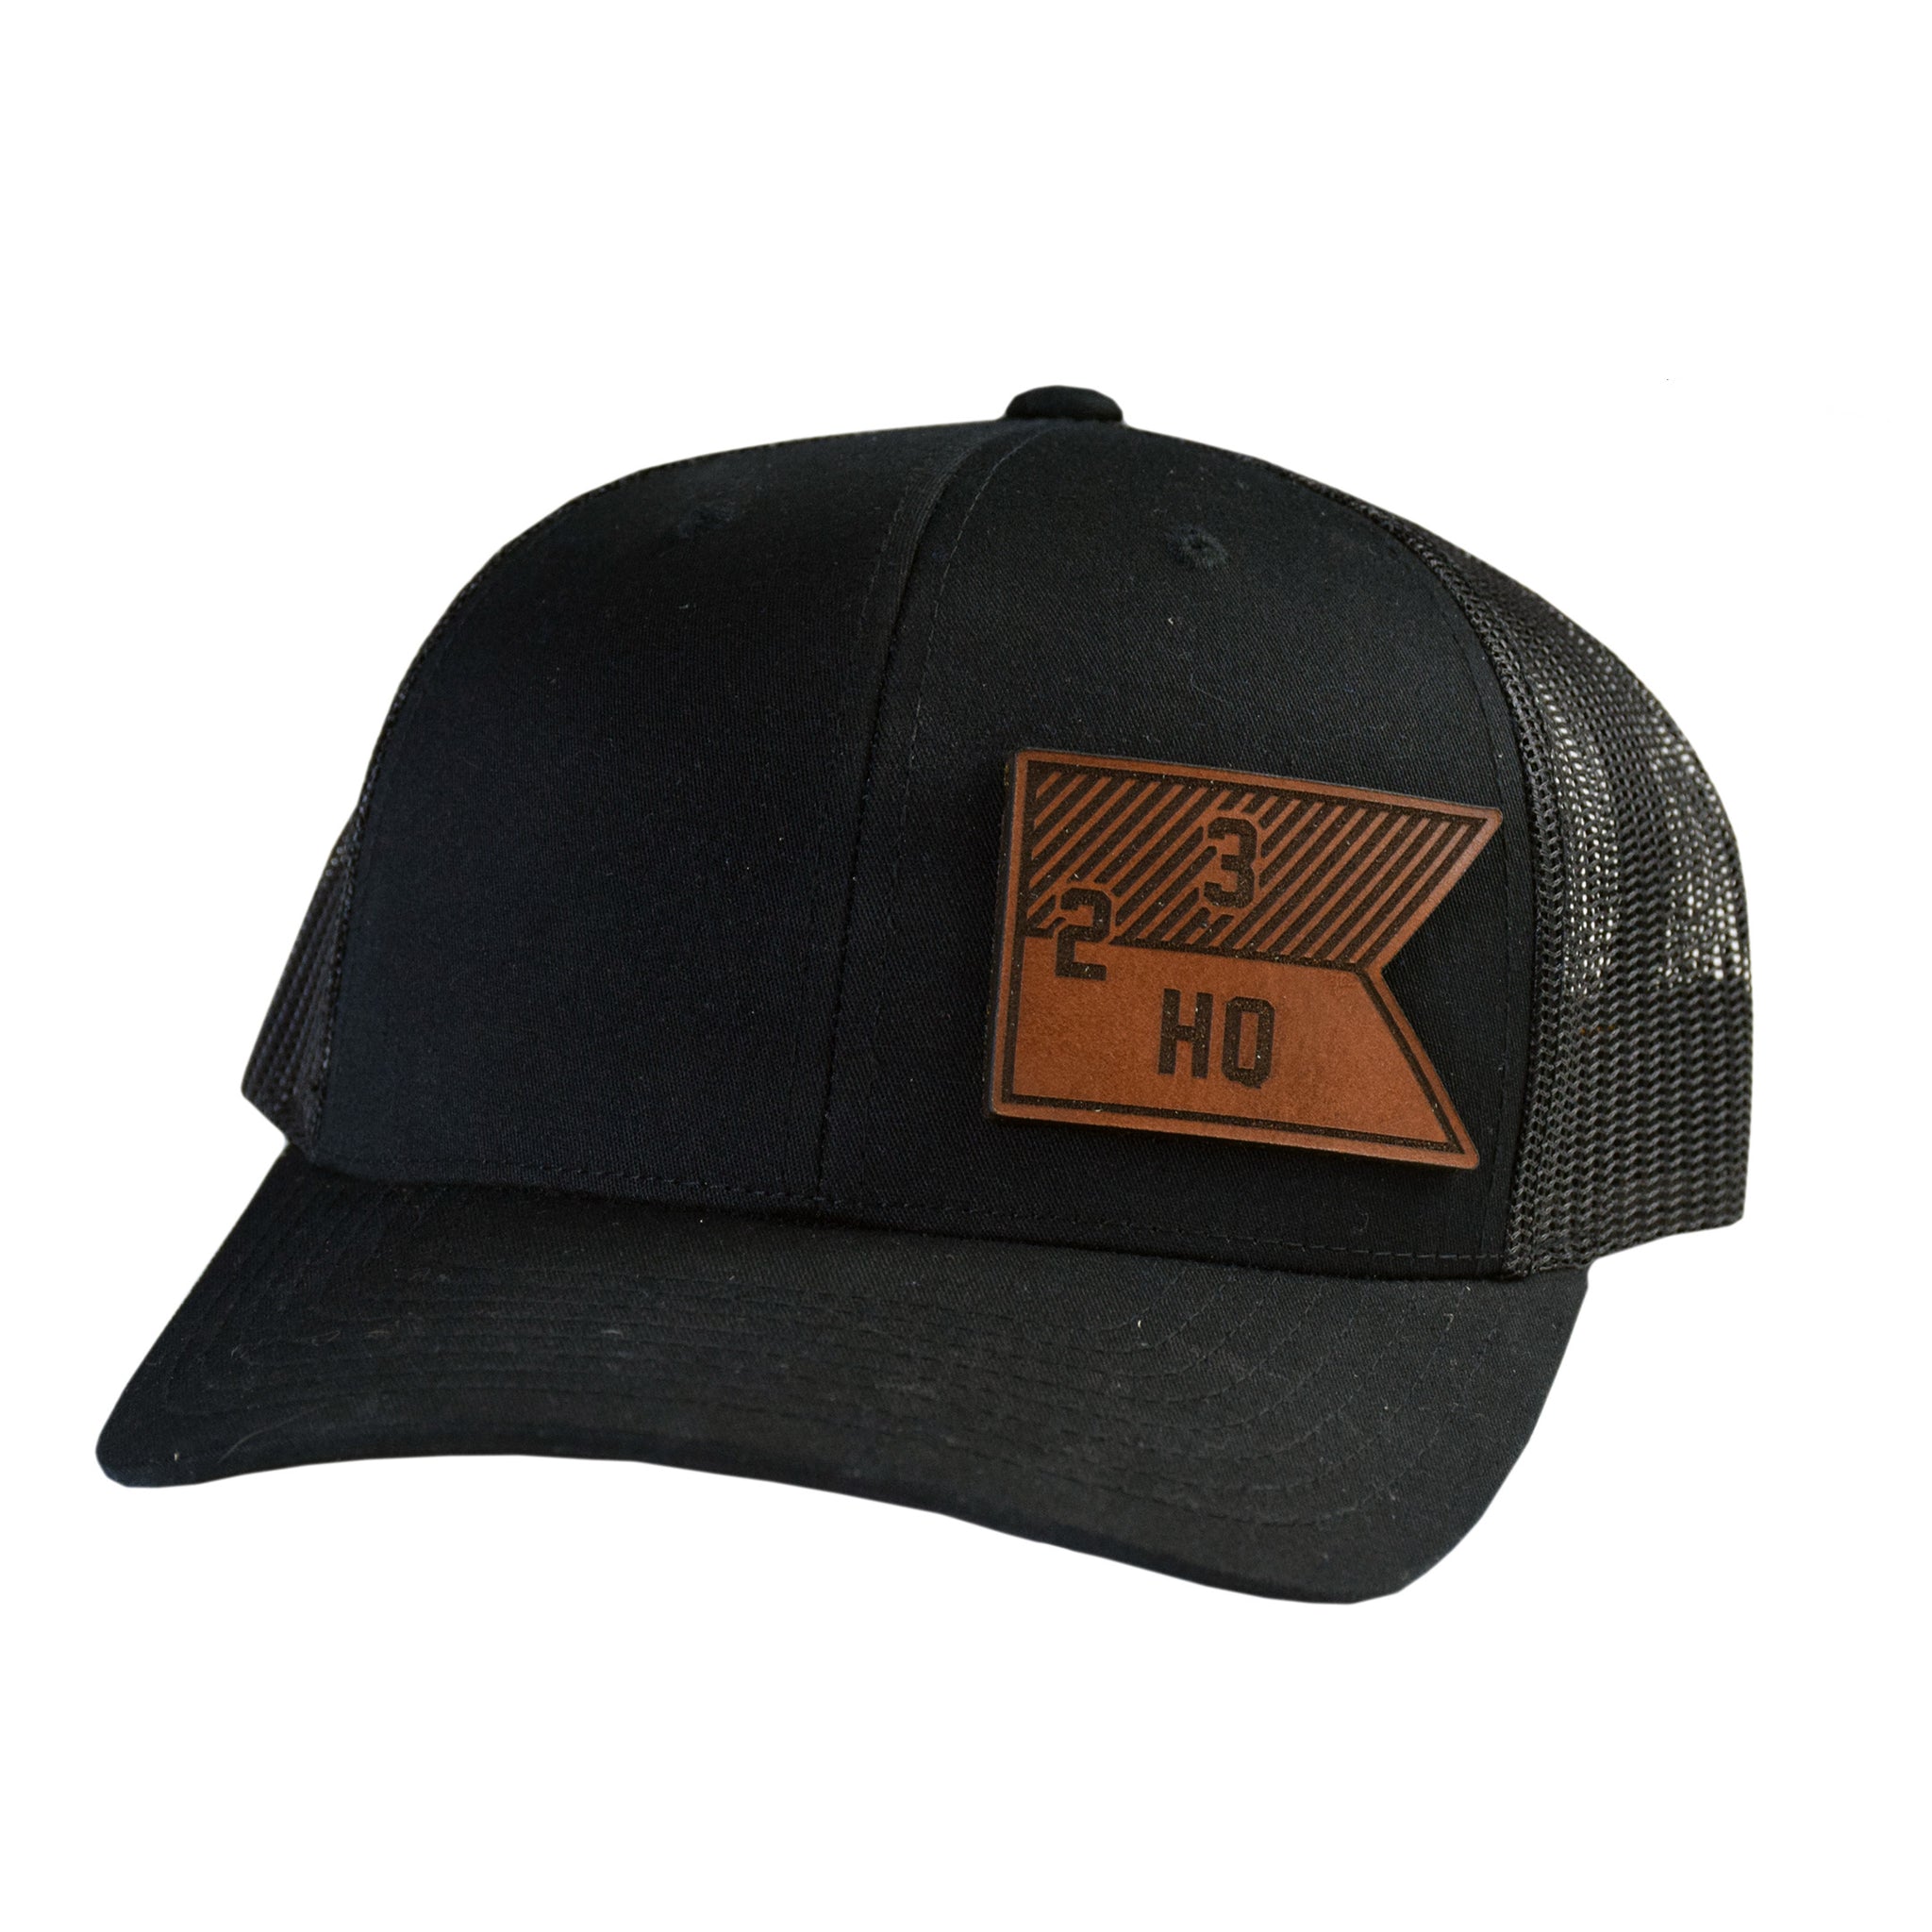 Rattler Troop Guidon Leather Snapback - American Trigger Pullers